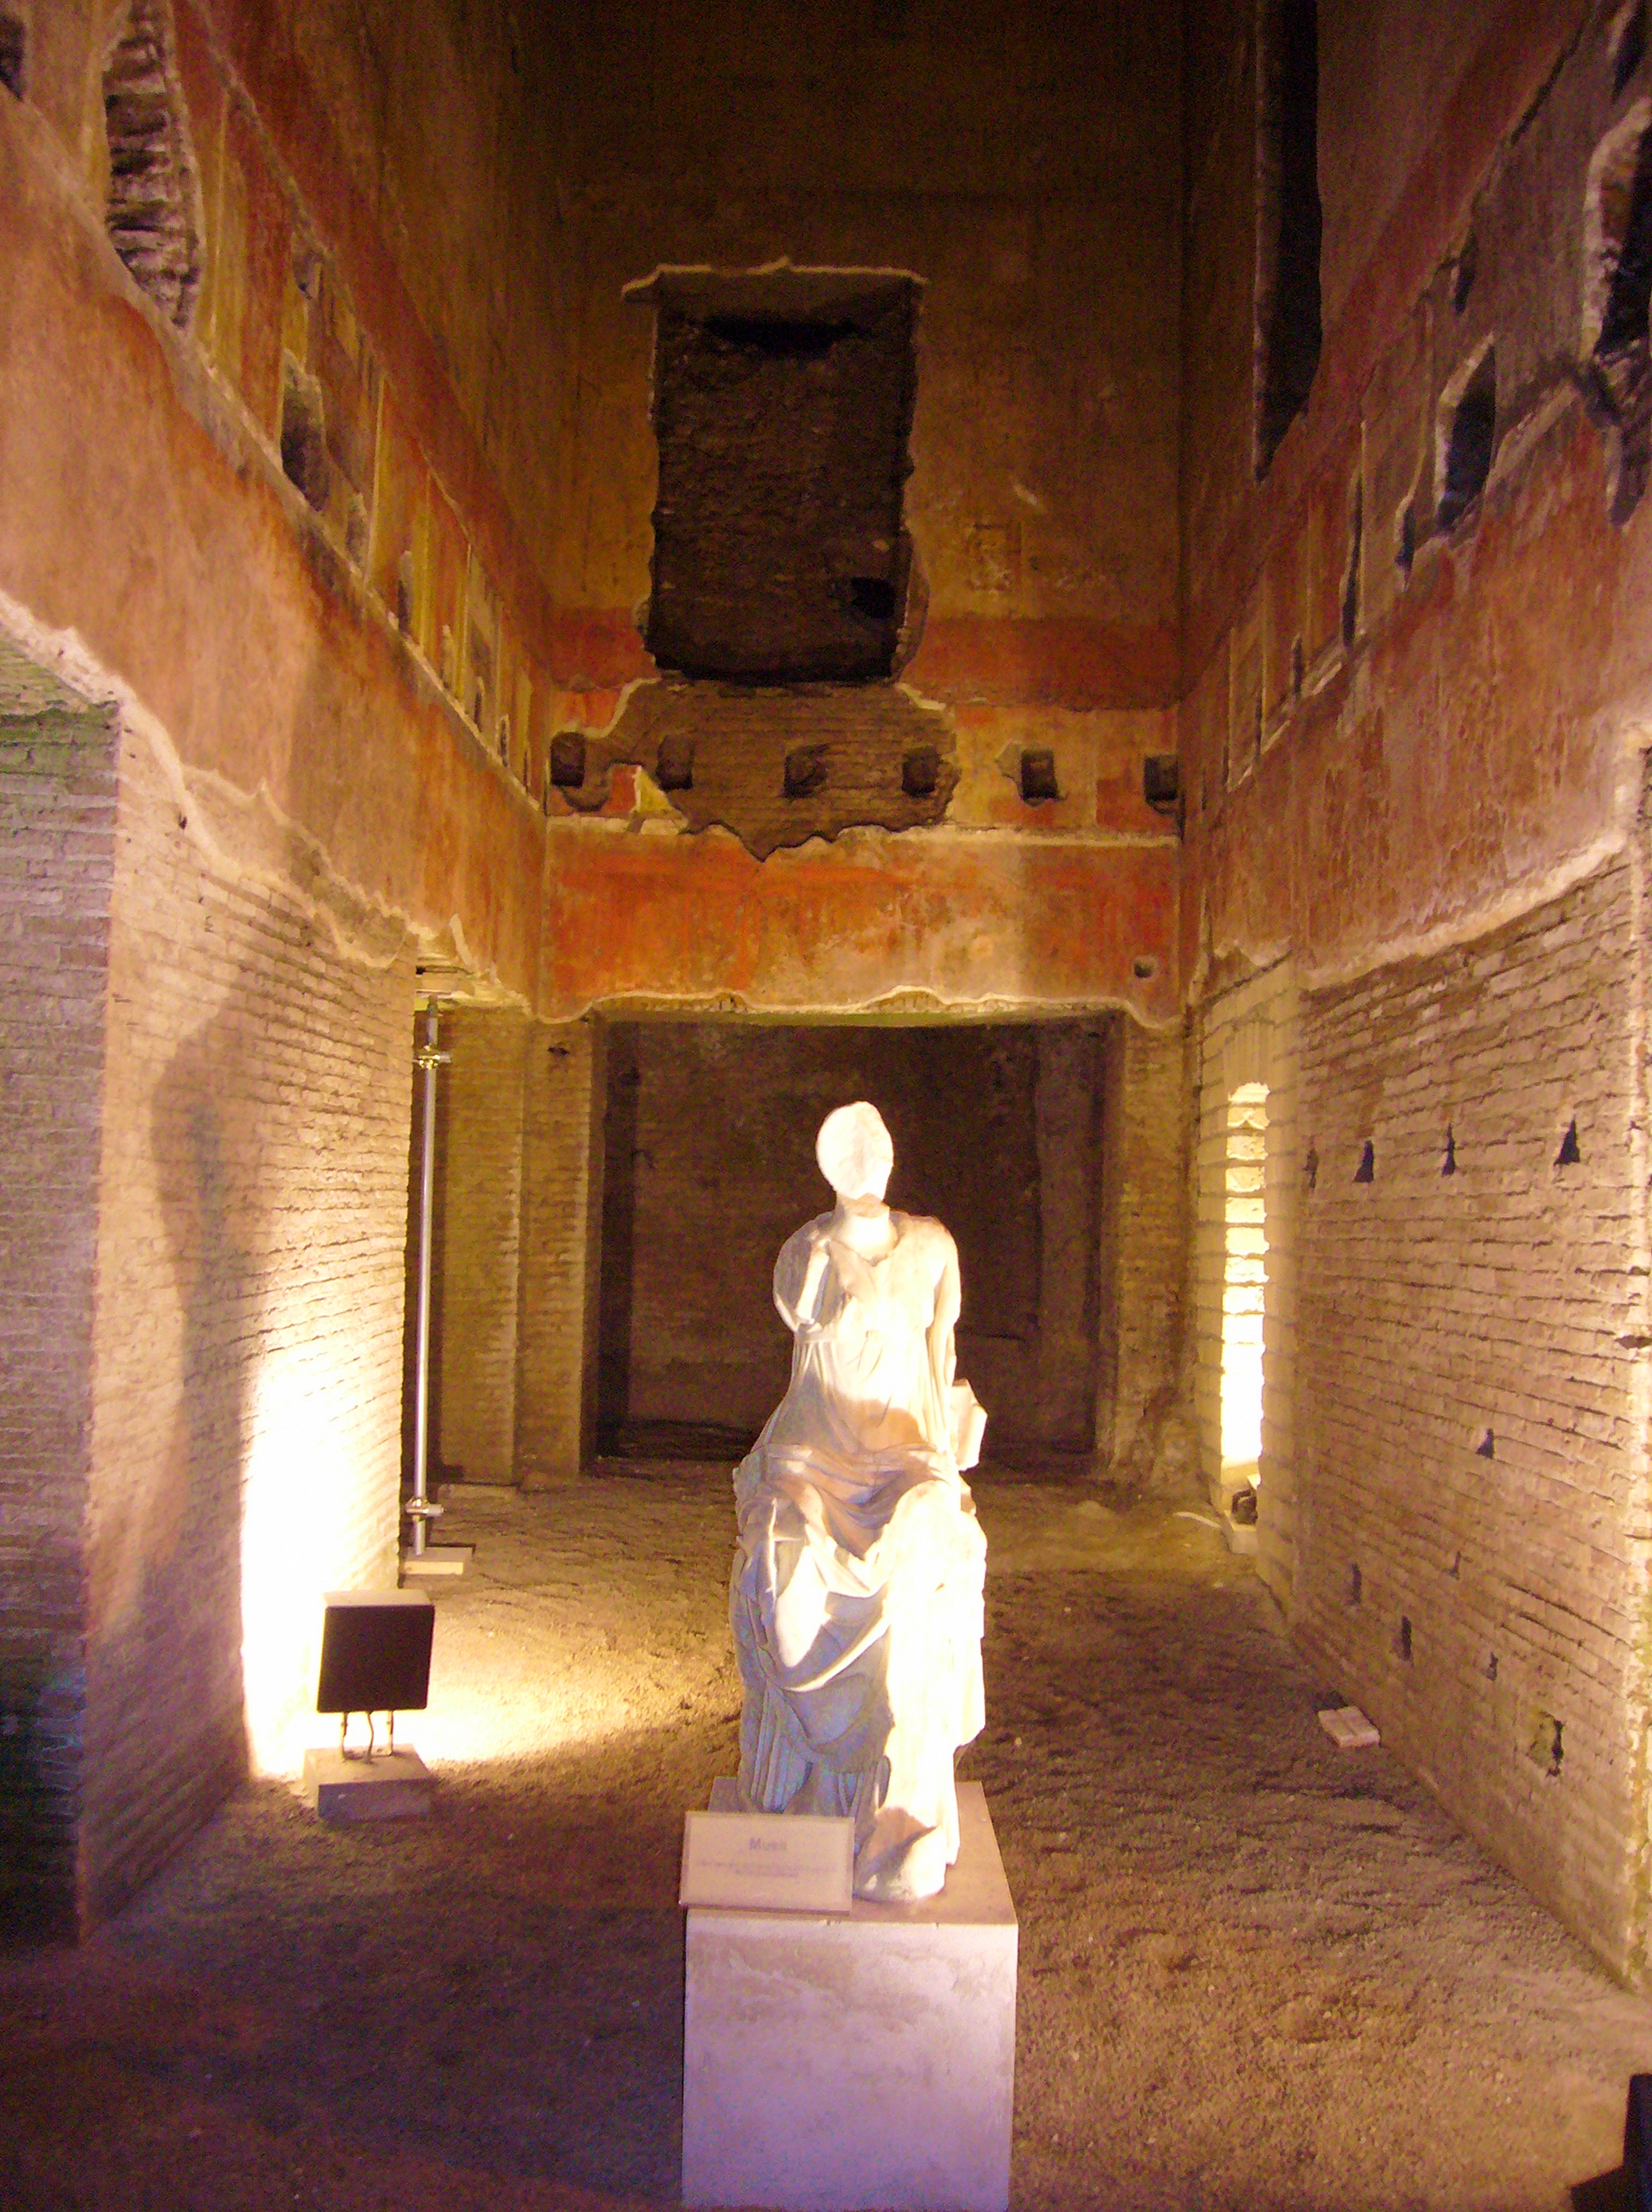 A room in the Domus Aurea as it looked in 2007